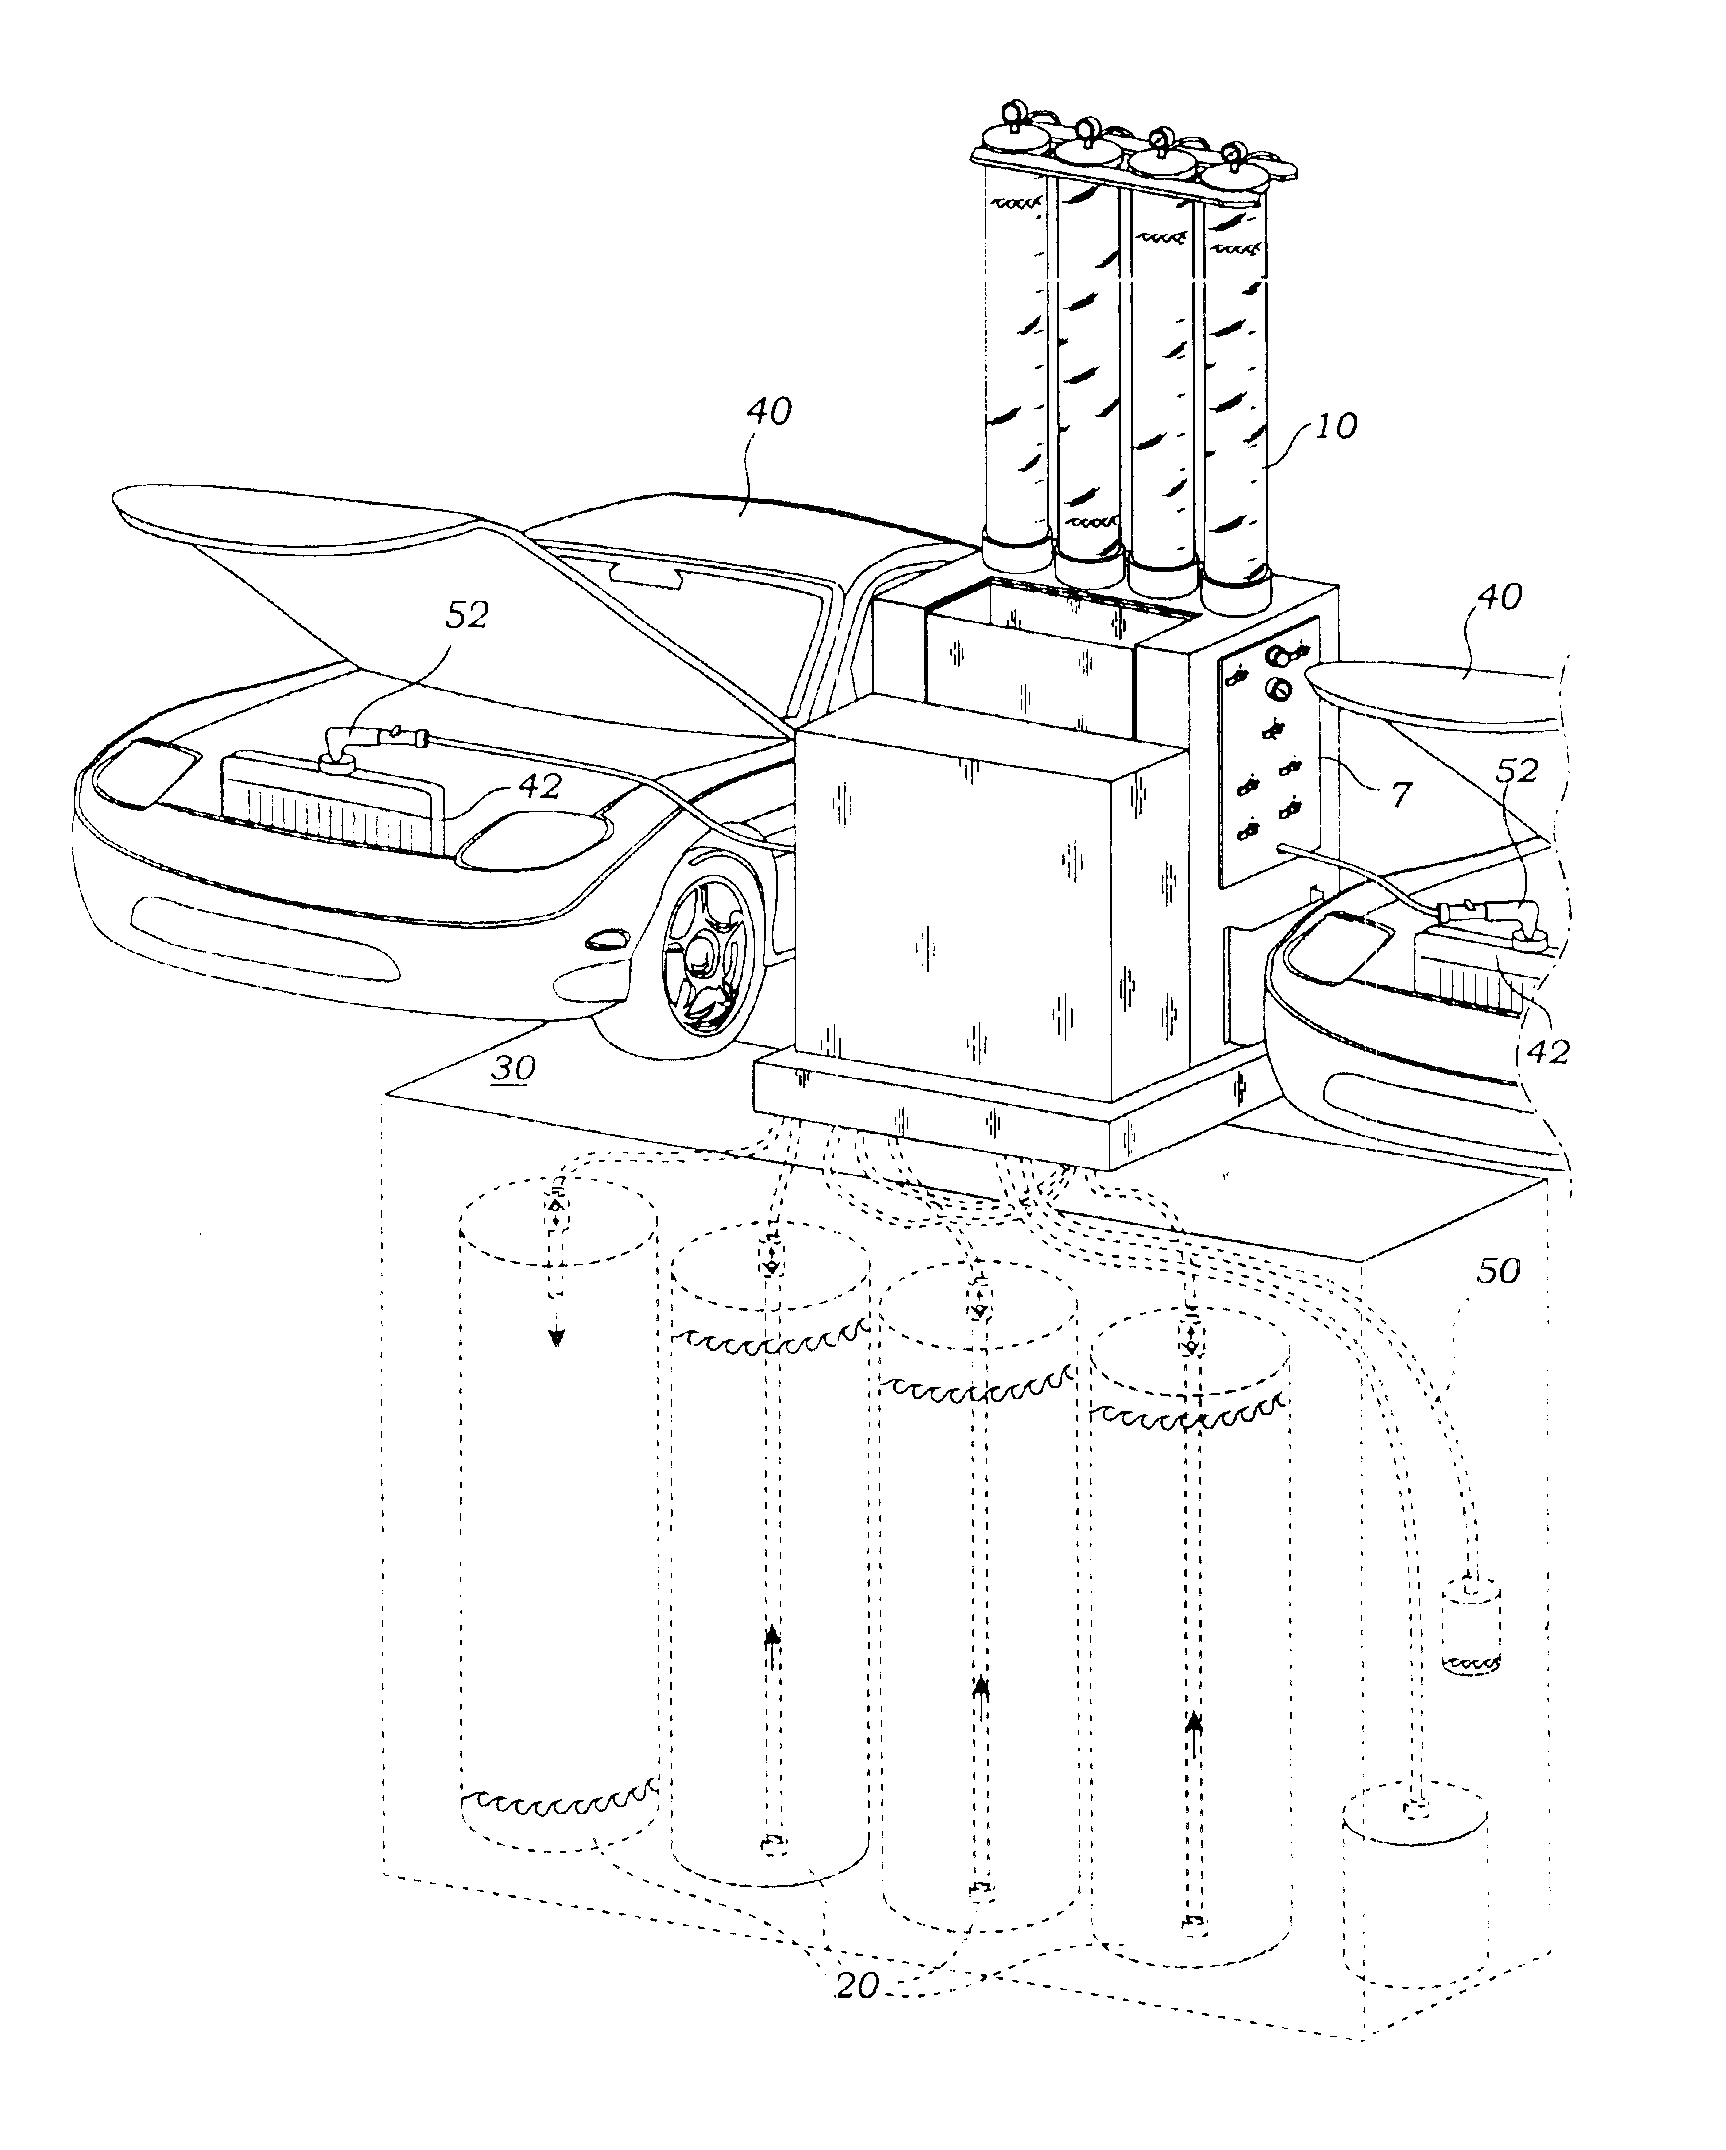 Stationary fluid replacement system and methods of use